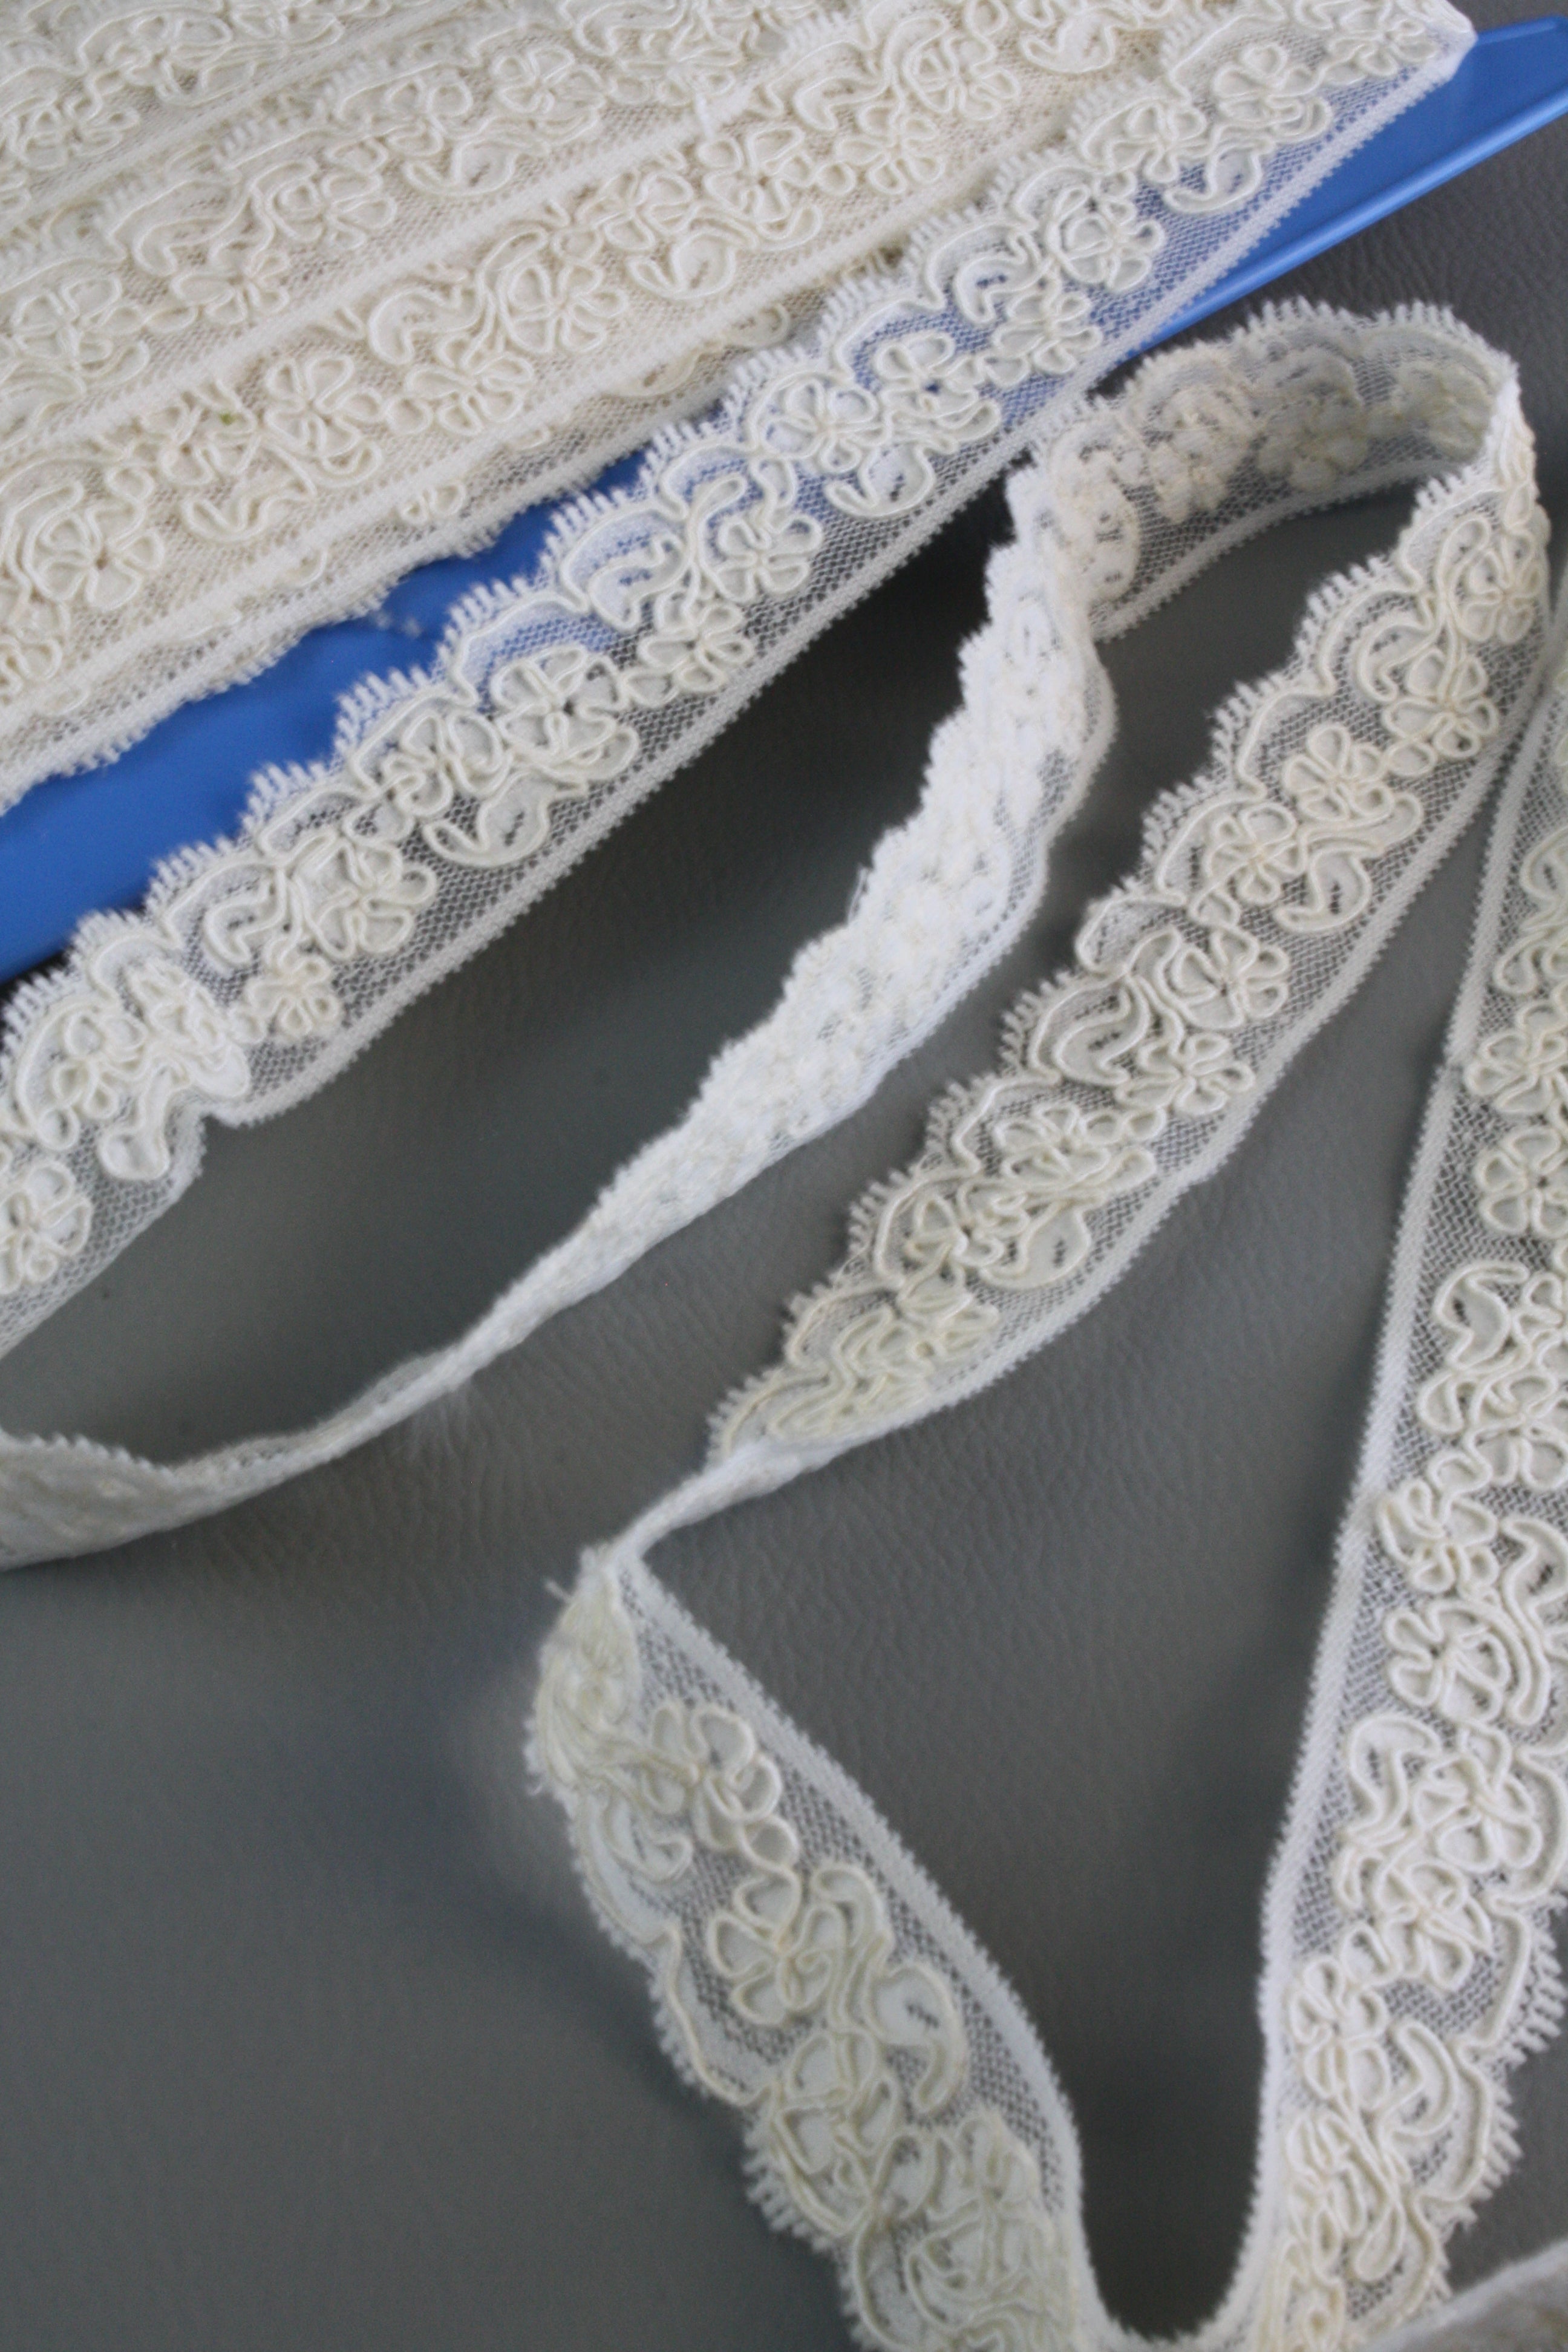 Corded lace Archives